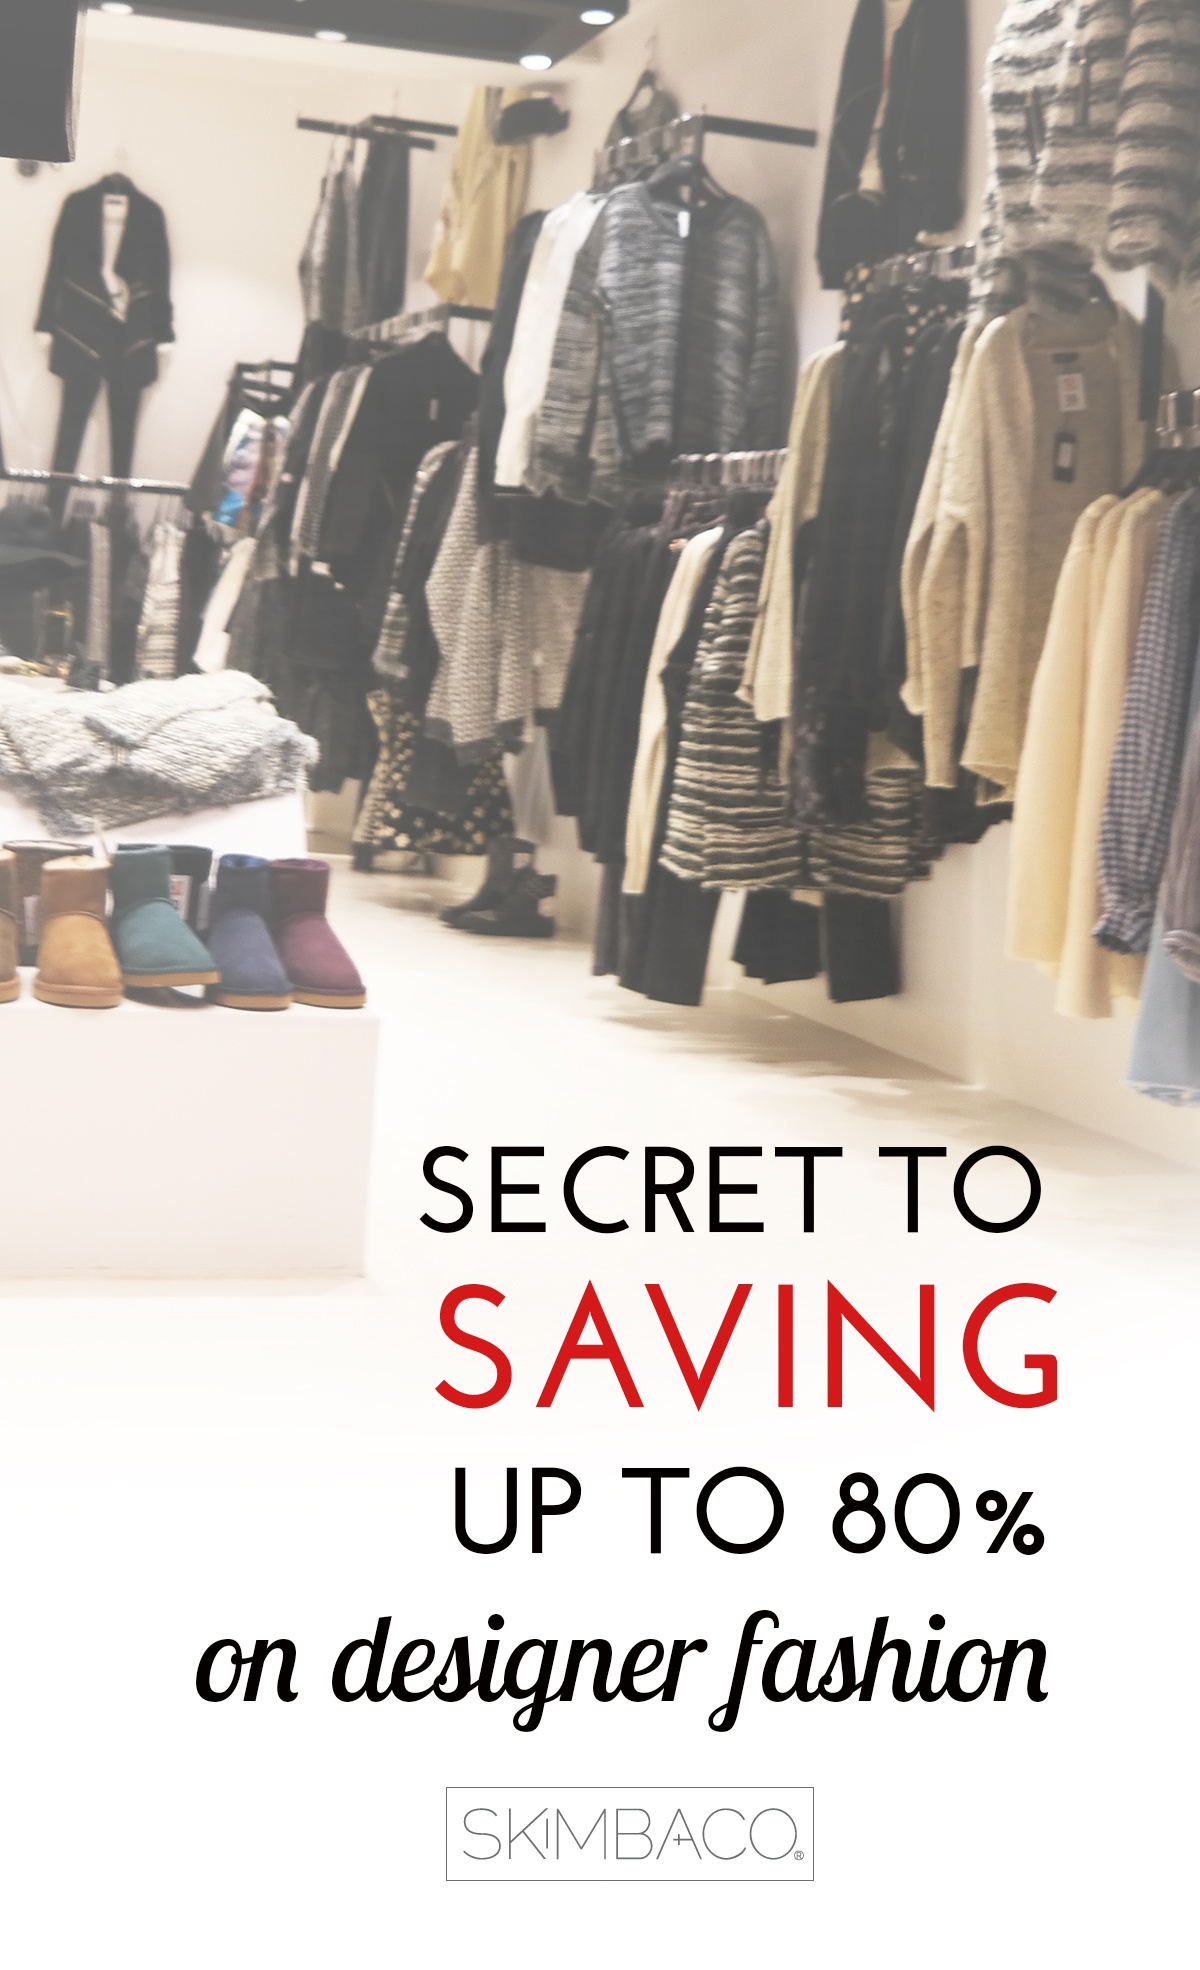 Invitation only shopping sites let you save up to 80% on fashion